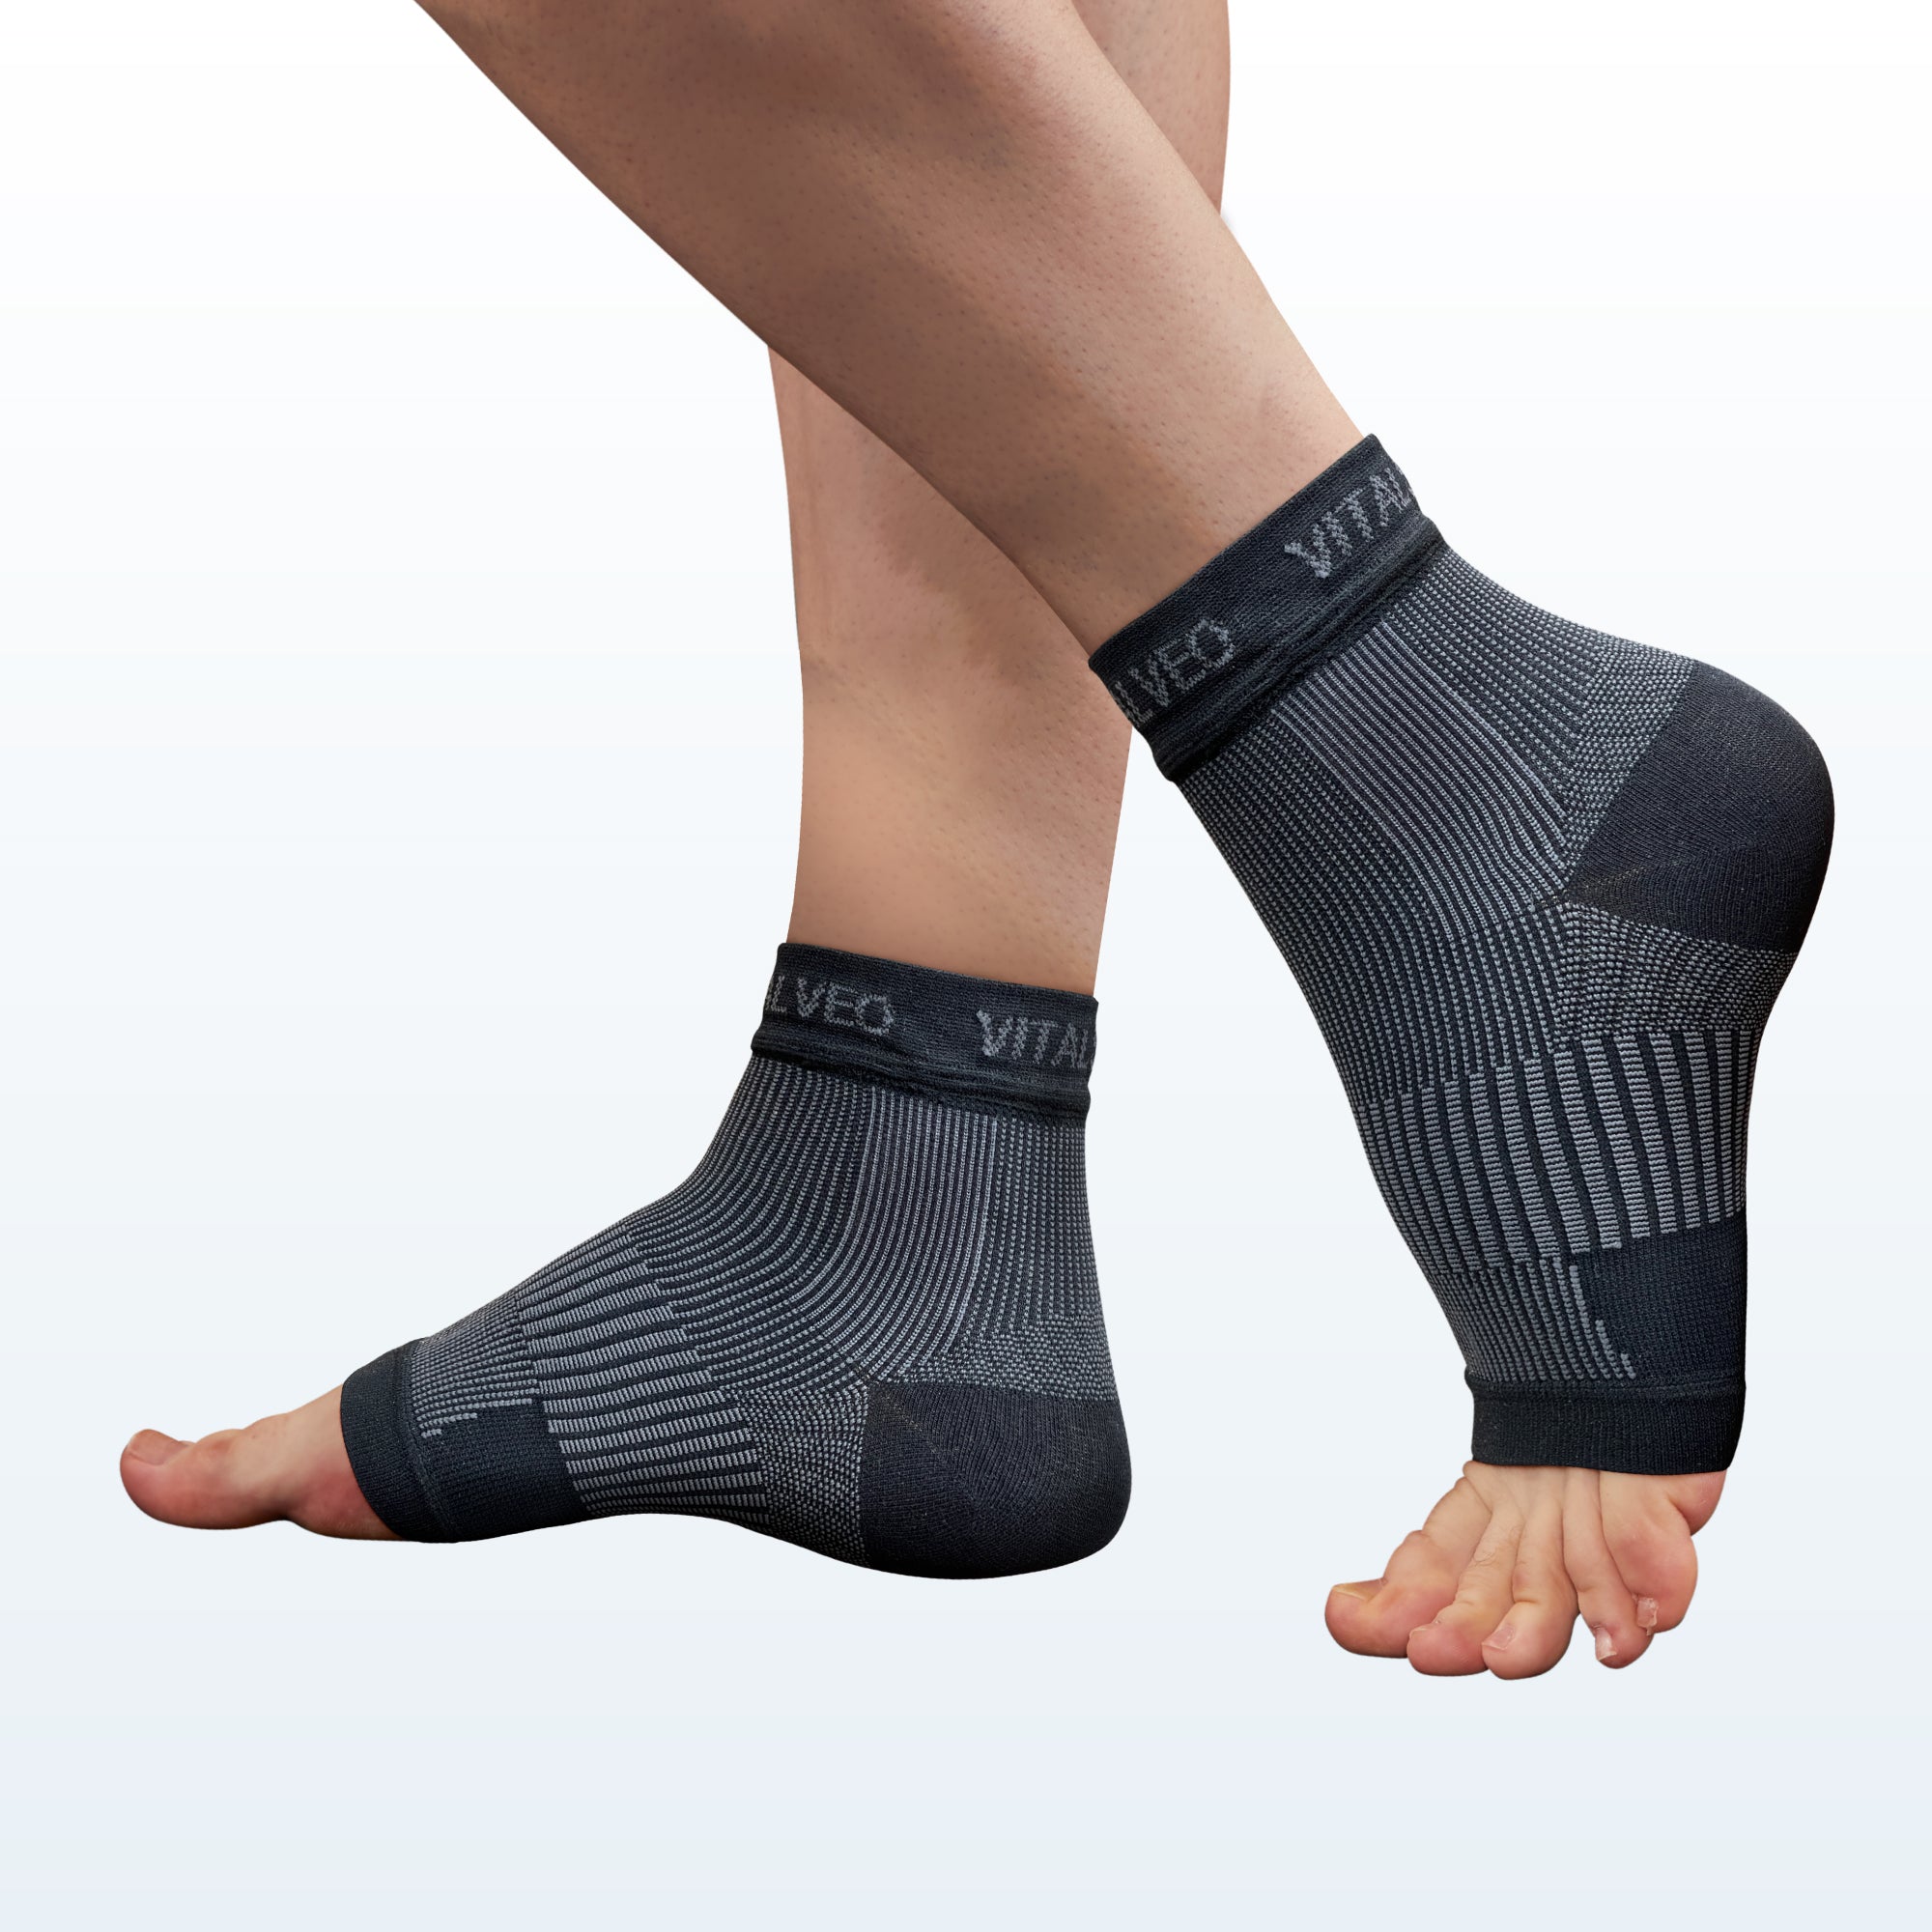 Compression Ultra Light Ankle Support Foot Sleeves (Pair)